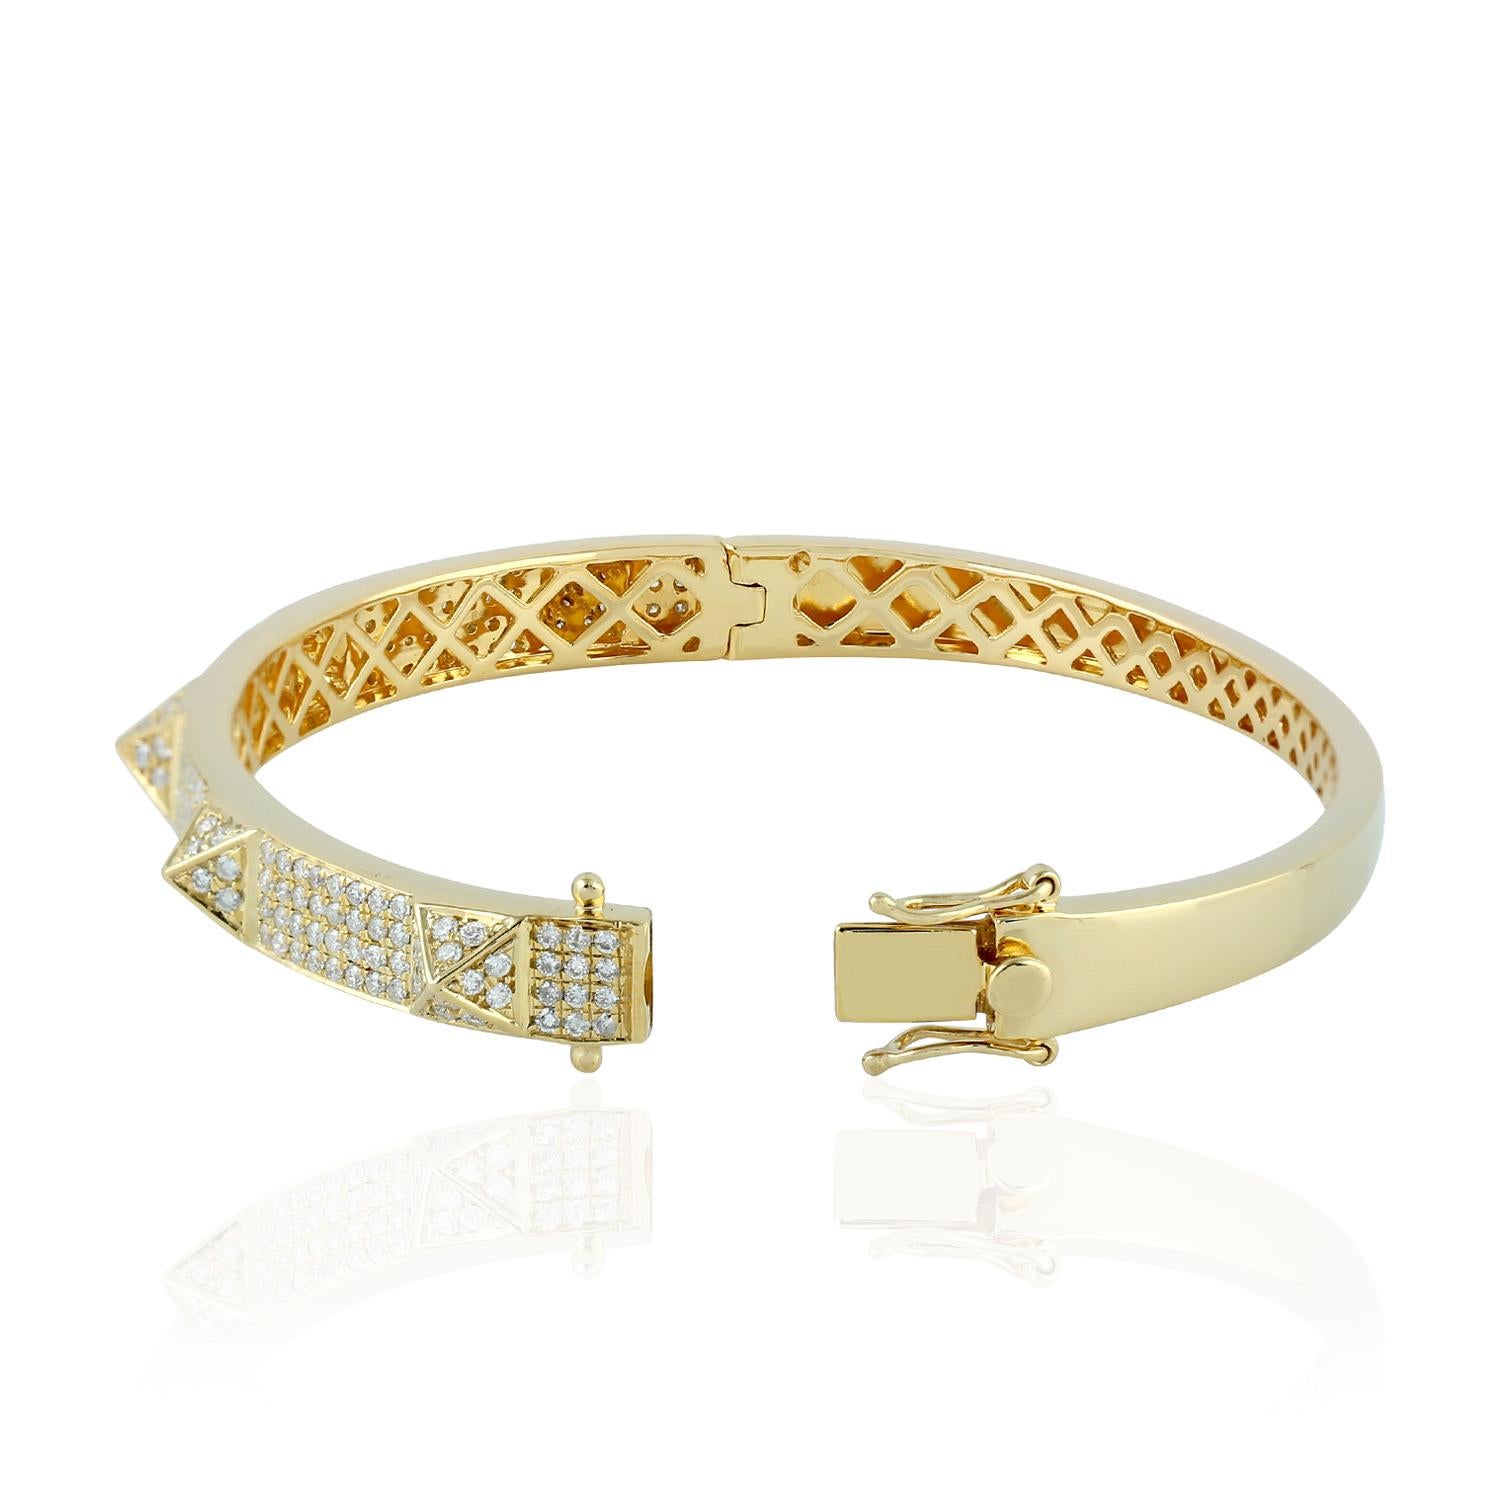 Art Nouveau Pave Diamond Spike Bangle Made In 18k Yellow Gold For Sale